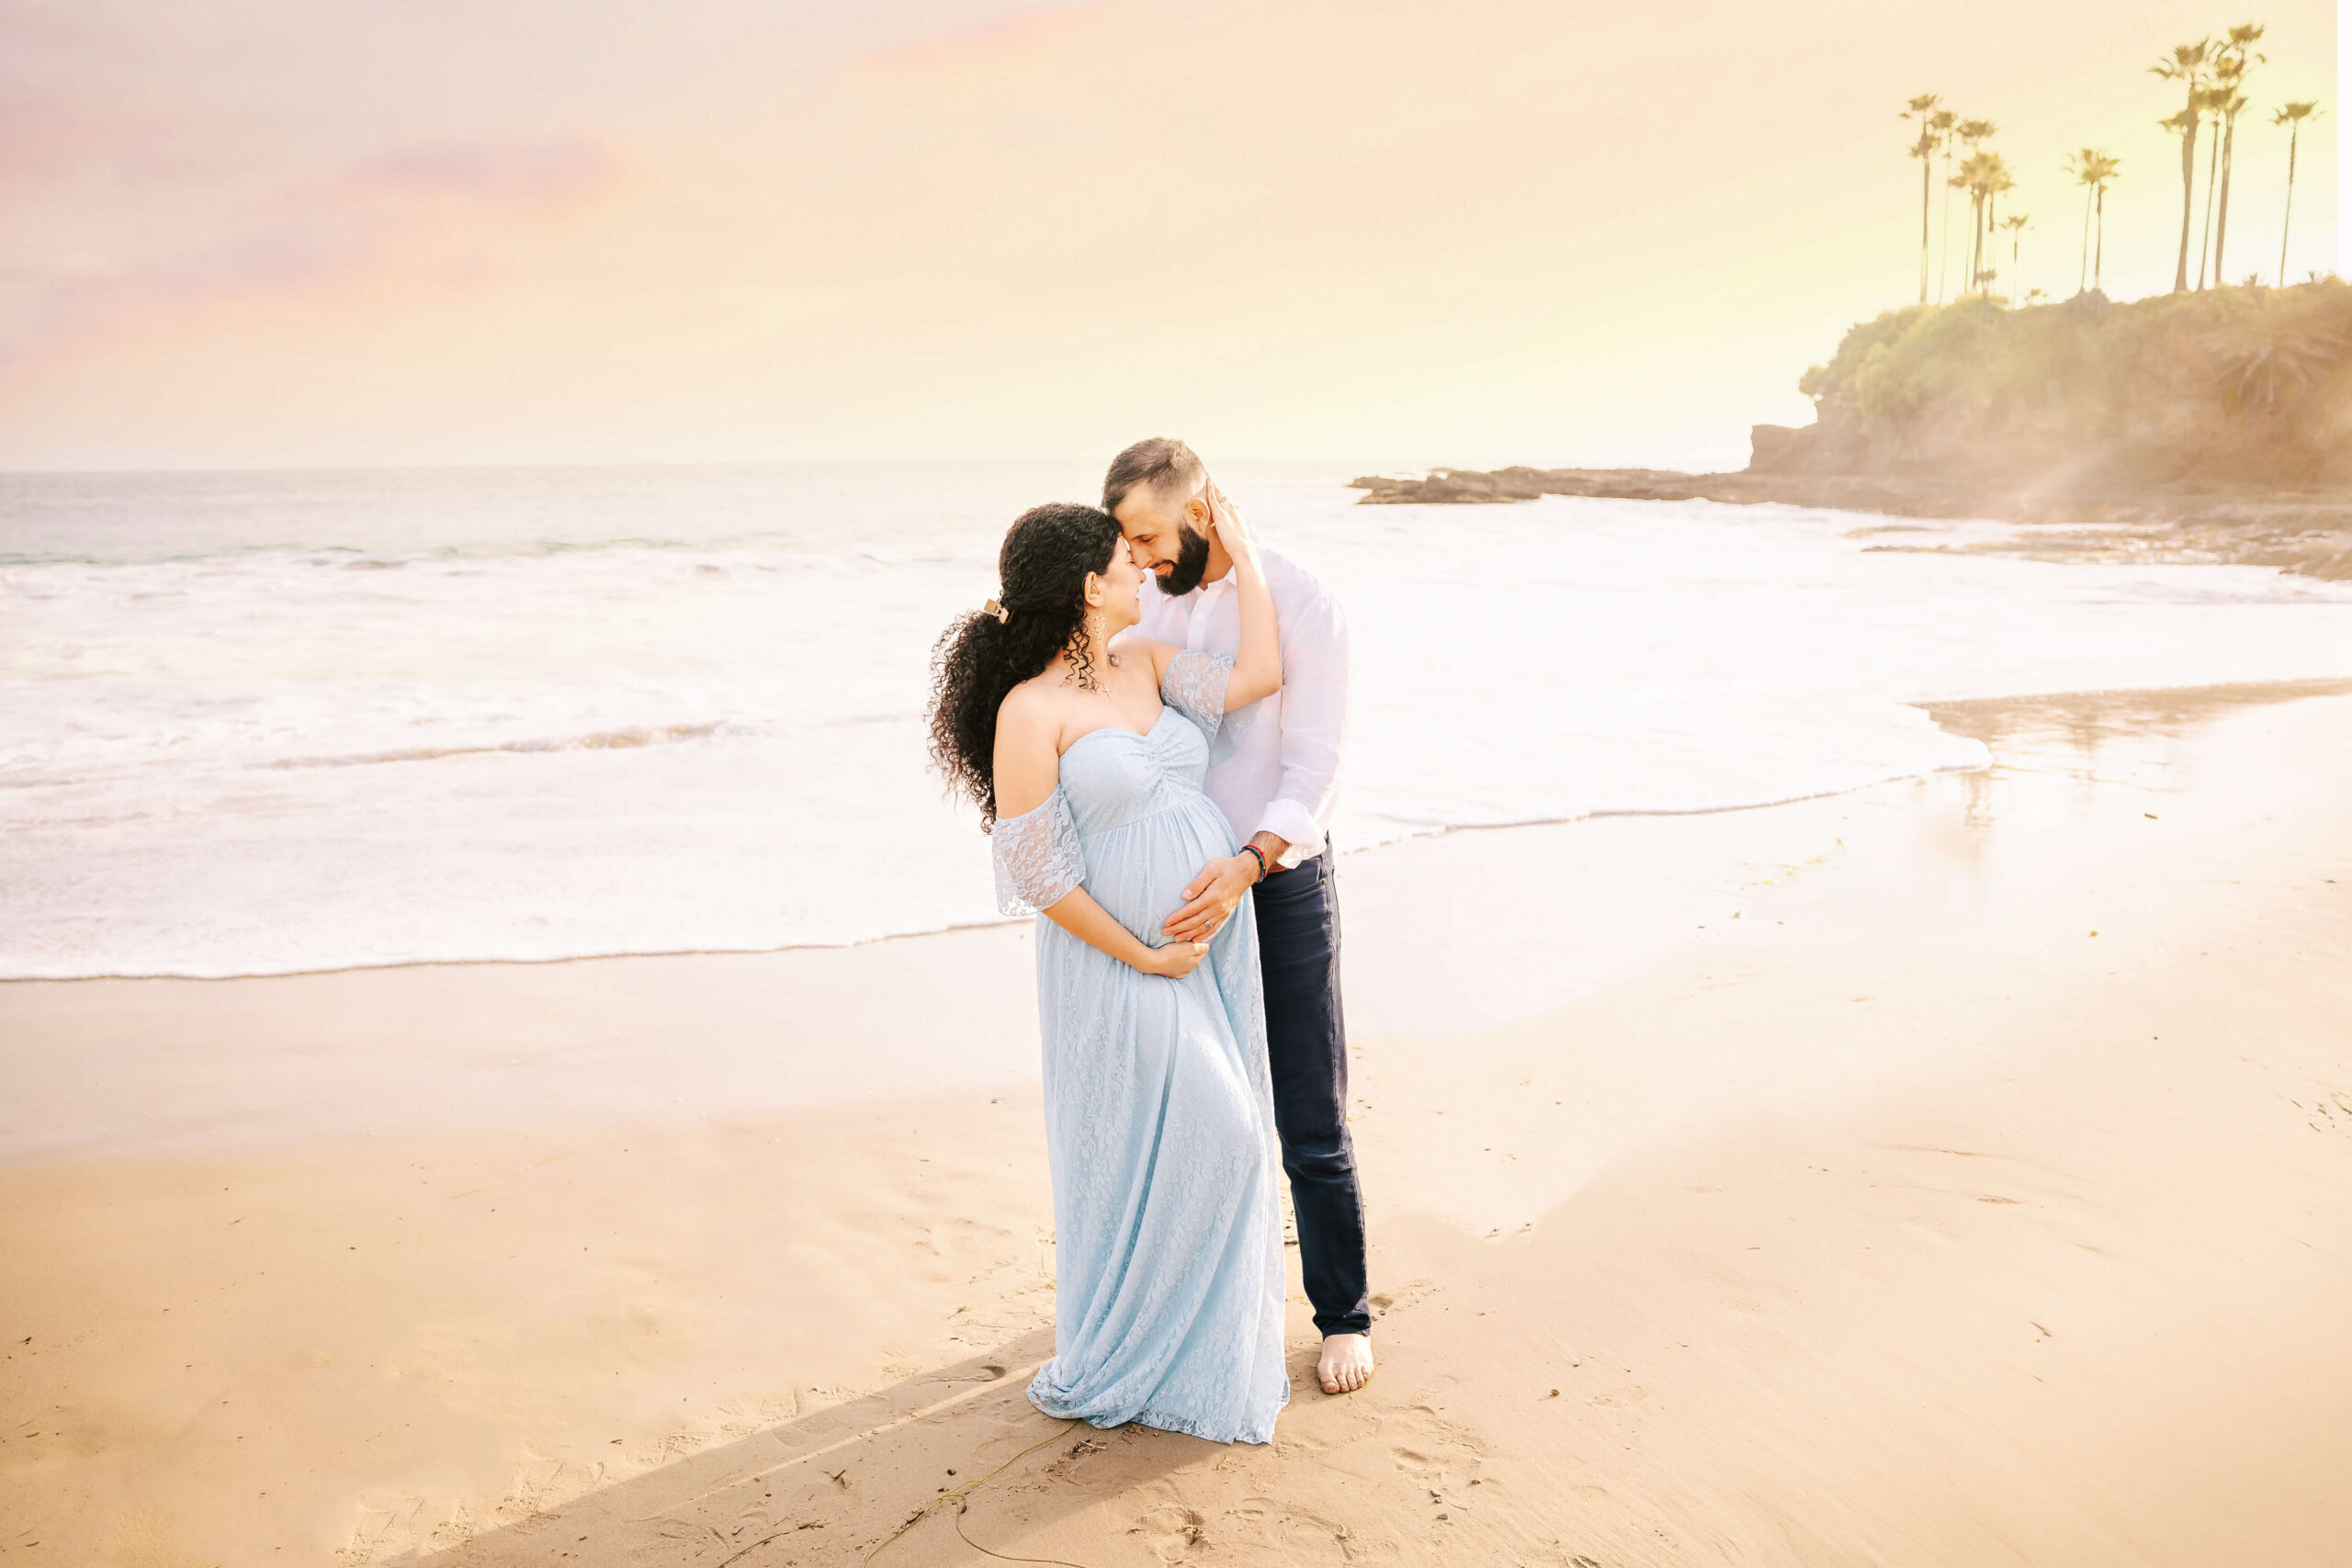 Couple embraced with touching foreheads during maternity session in Laguna Beach, CA by Ashley Nicole Photography.